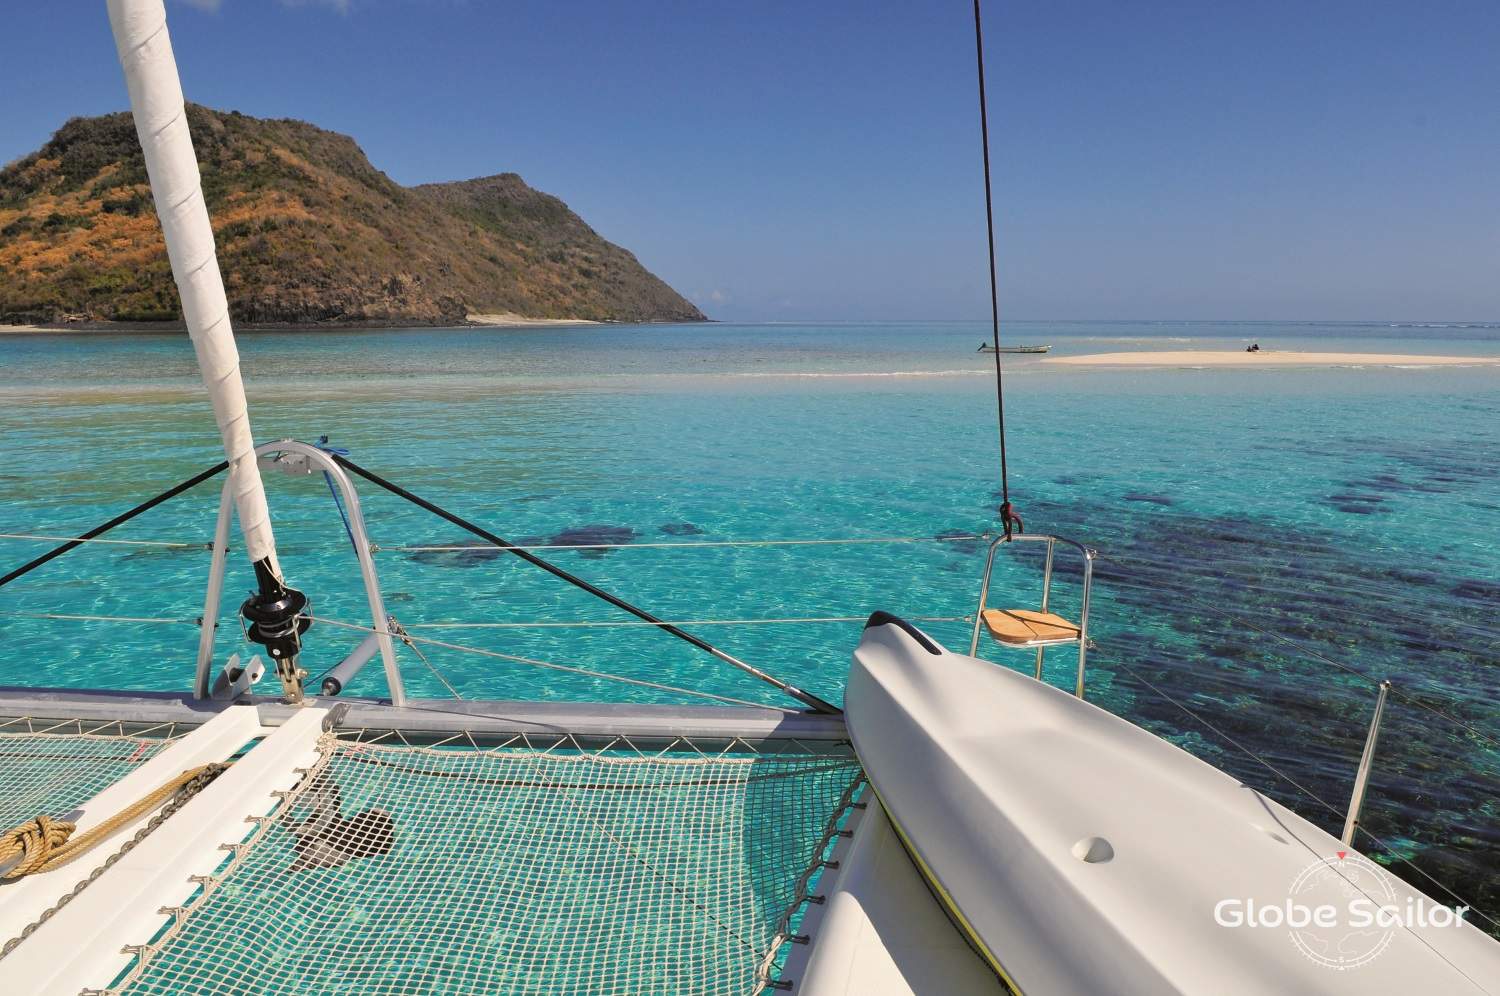 Make the most of the Catamaran nets for relaxing under the sun!